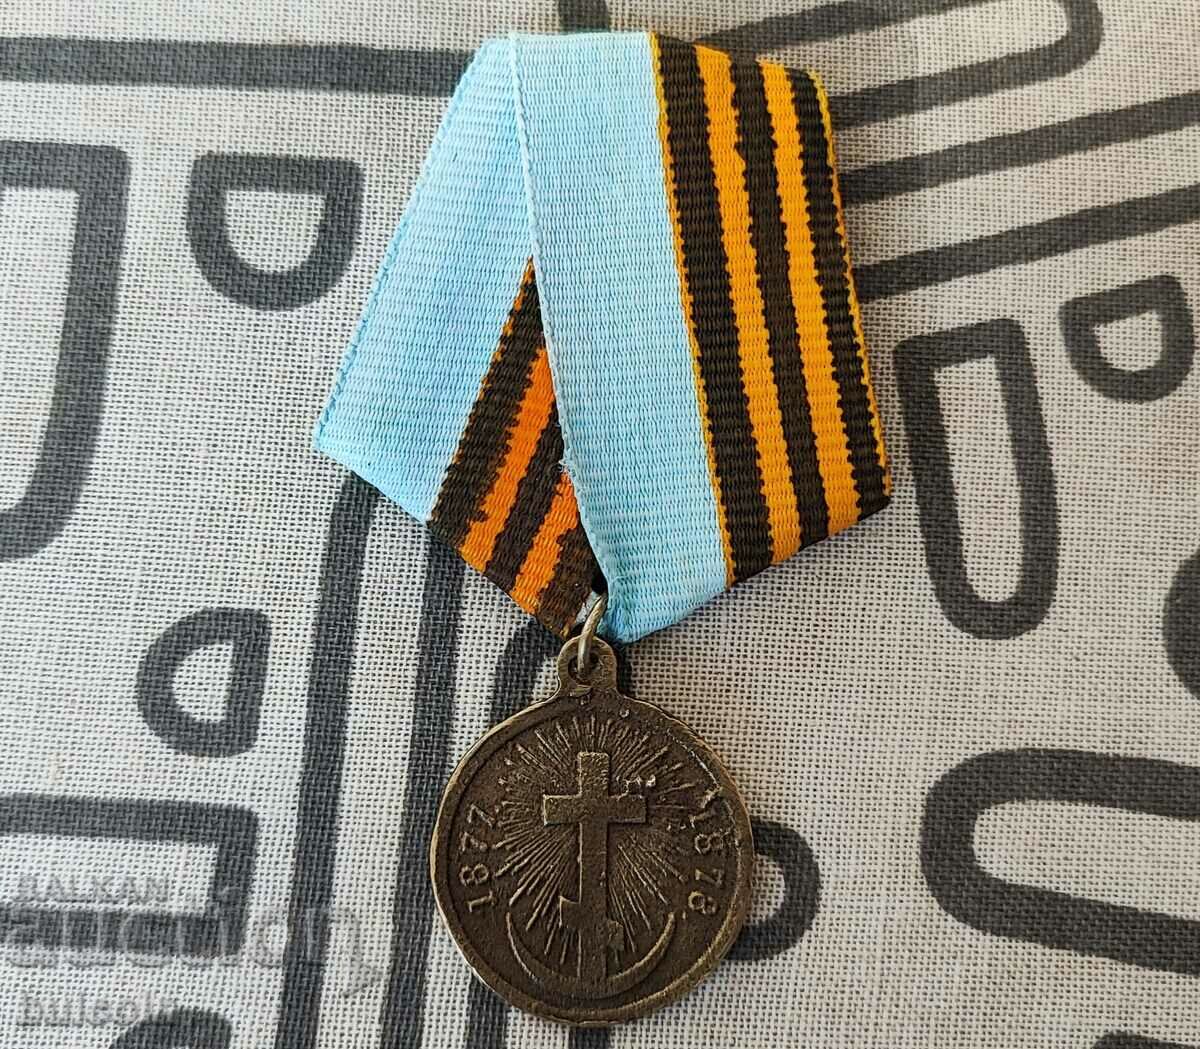 RARE MEDAL for PARTICIPATION IN THE RUSSO-TURKISH WAR 1878